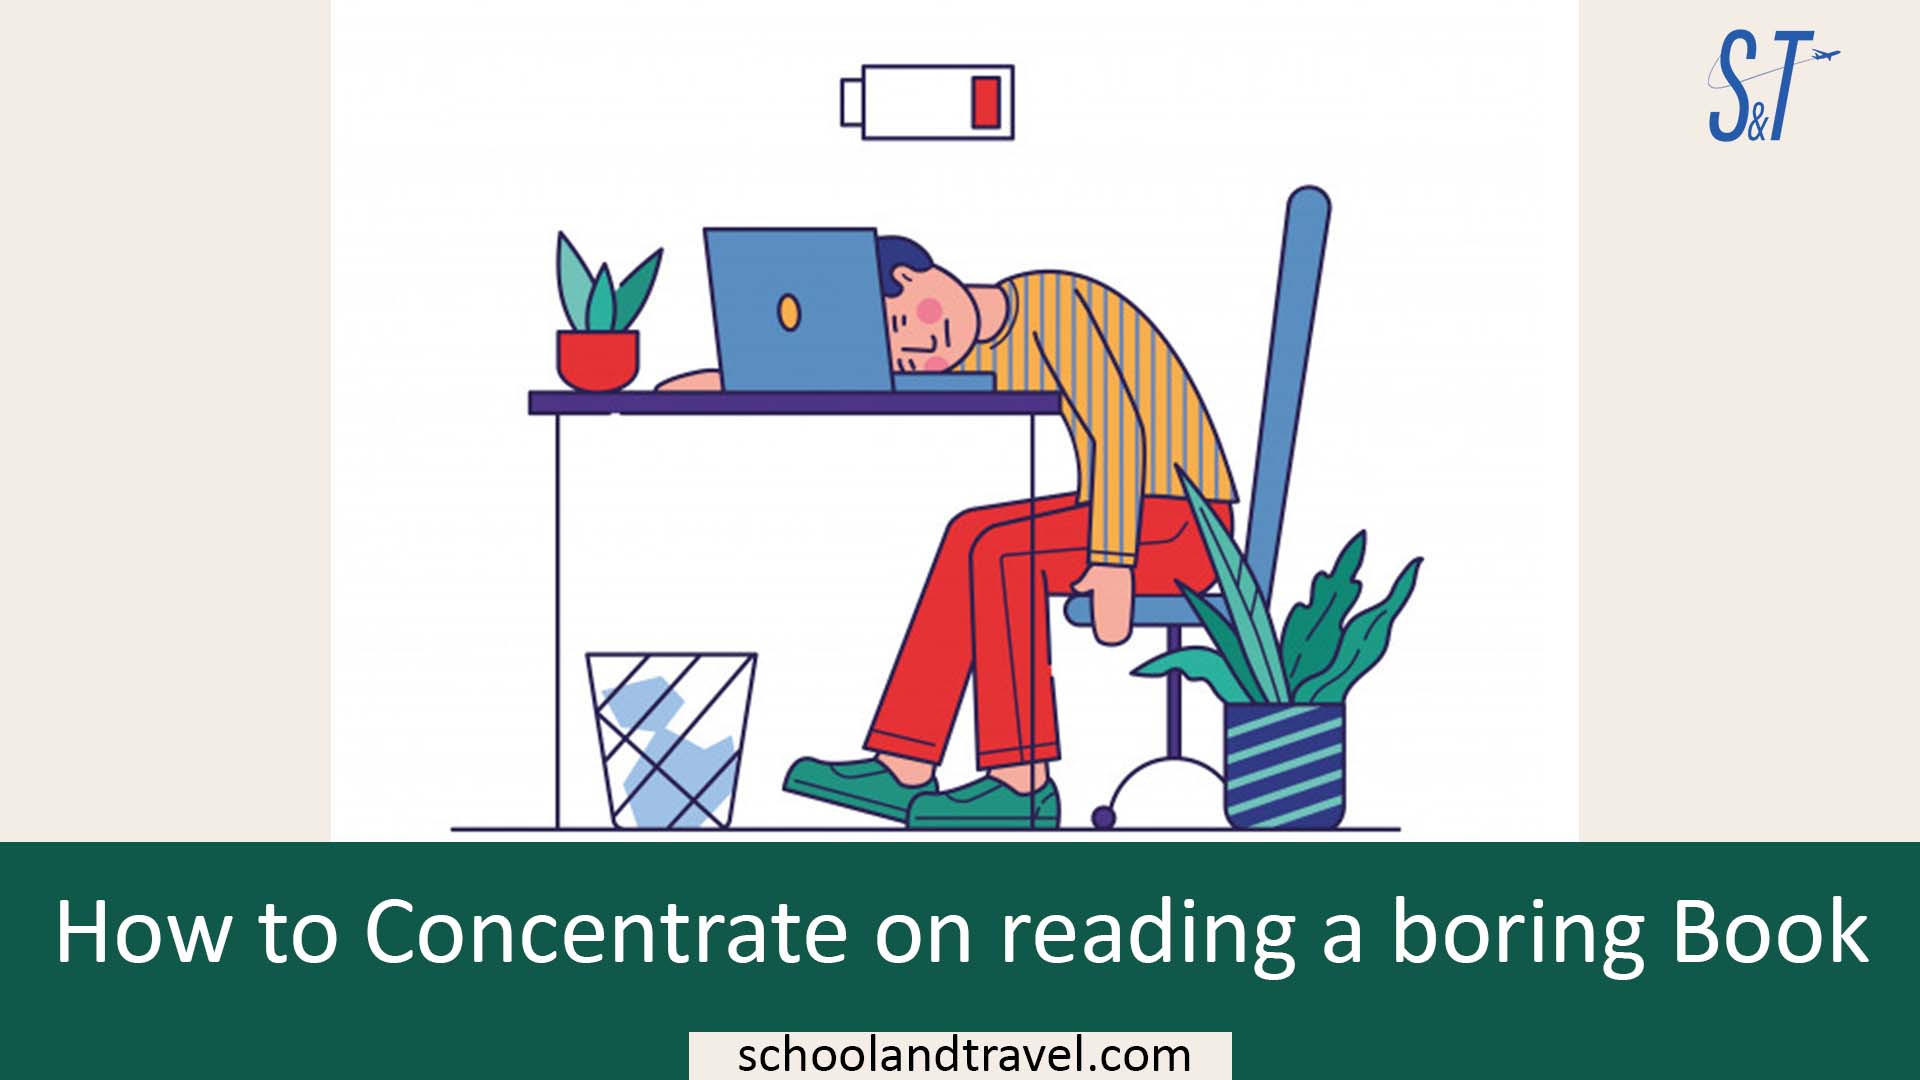 How to Concentrate on reading a boring Book